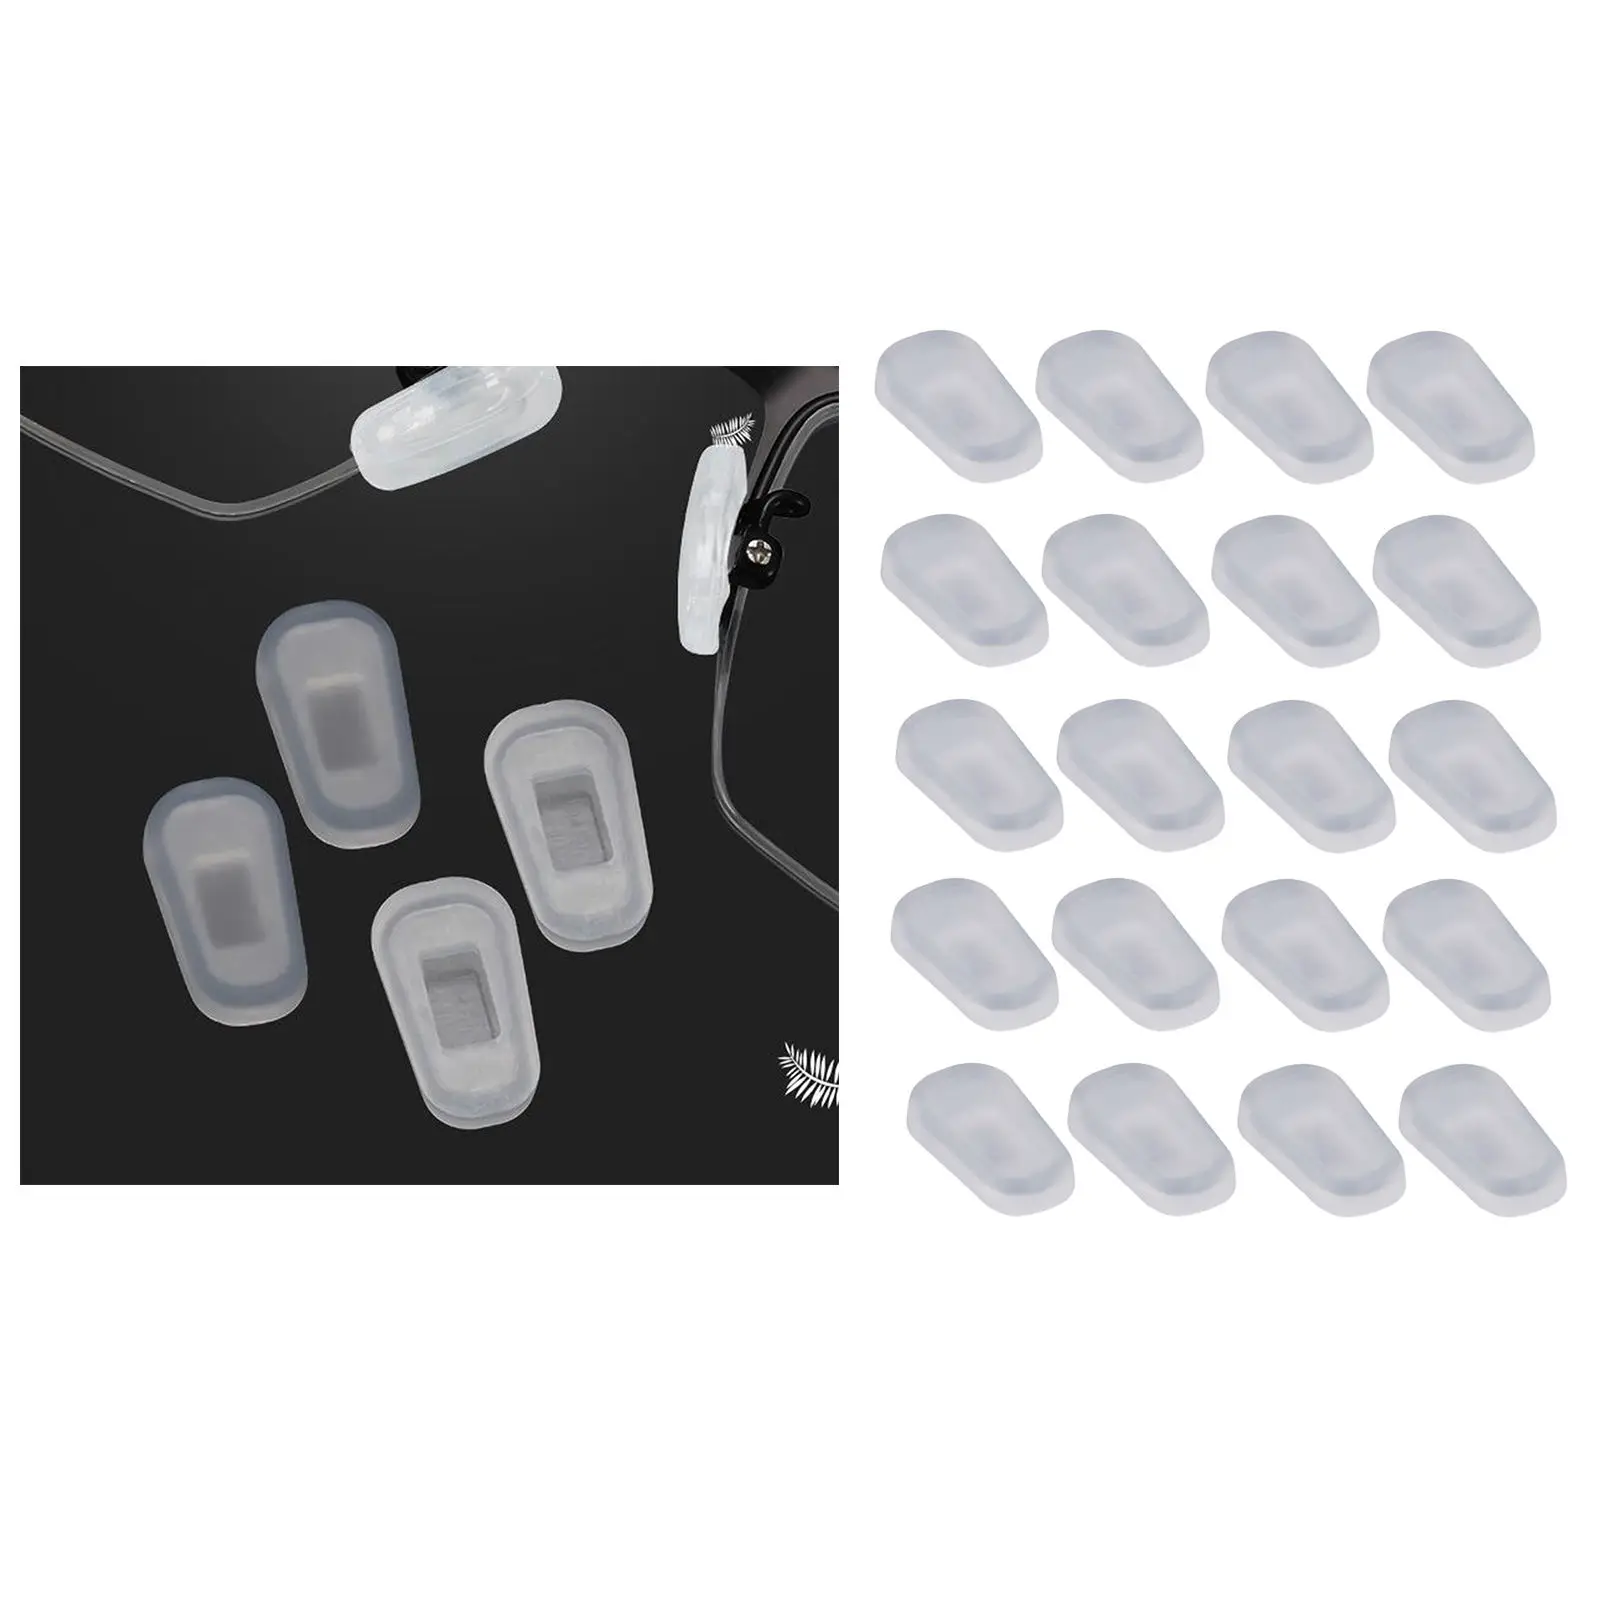 10-Pairs Clear Silicone Eyeglasses Nose Pads Covers Nosepads Replacement